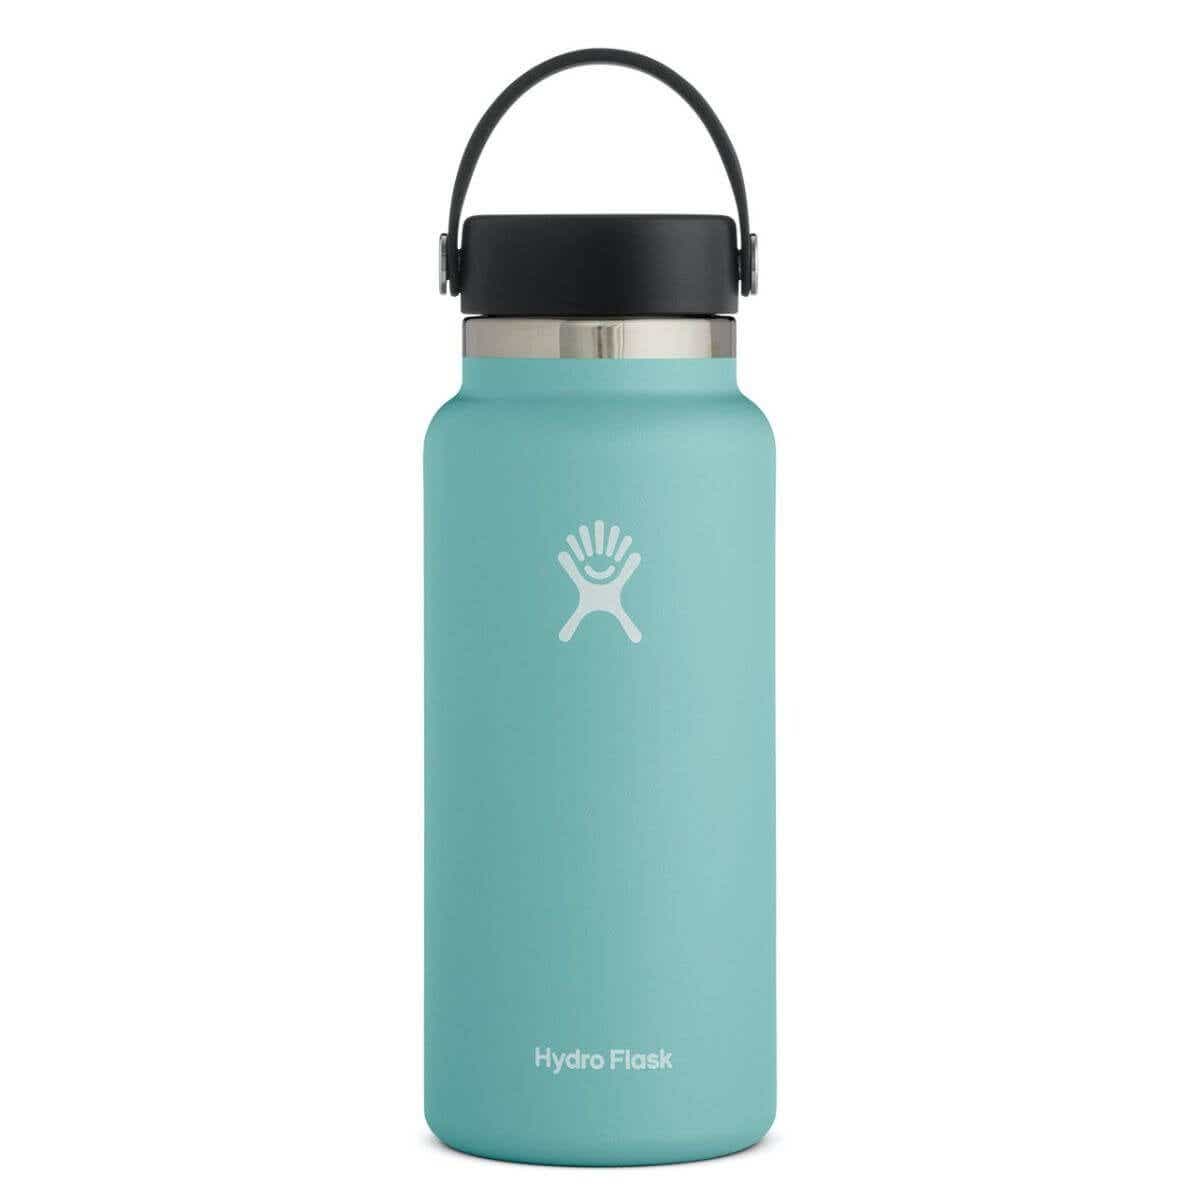 hydroflask in alpine color